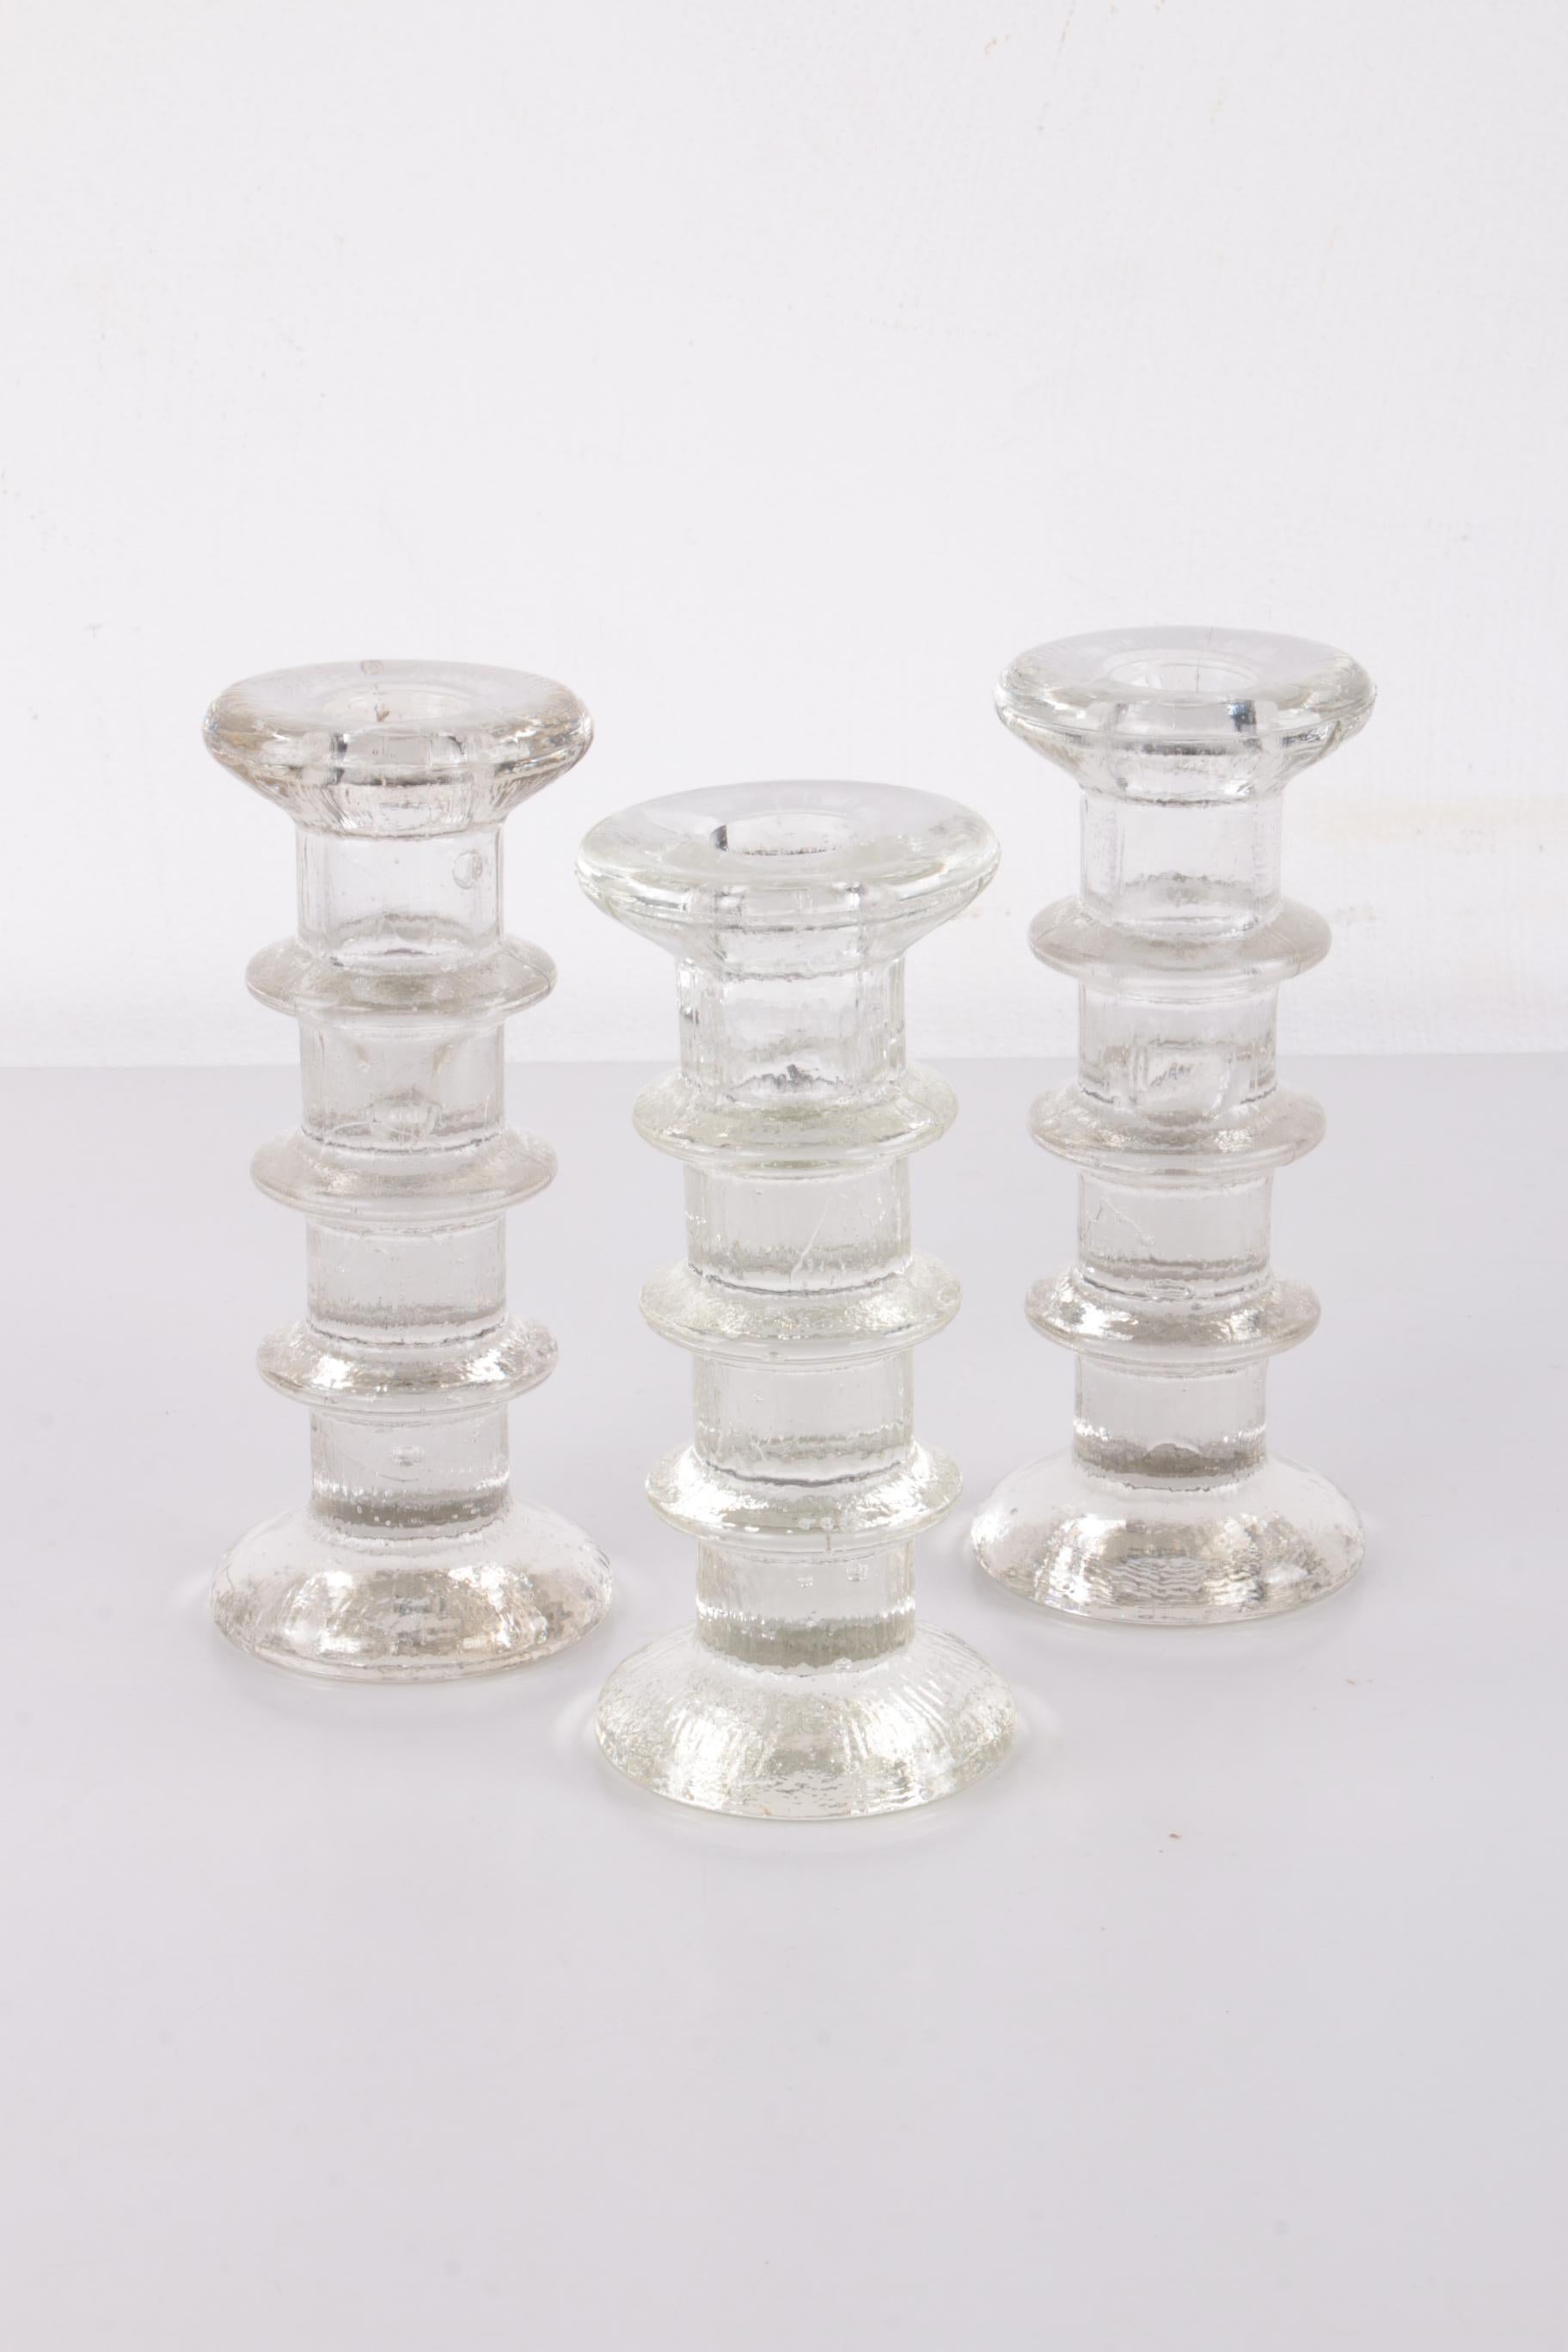 Vintage set of 3 iittala glass candlesticks Design by Timo Sarpaneva 1960s


A beautiful set of 3 glass candlesticks from Scandinavia: Iittala festivo candlestick/candle holder with multiple rings, design by Timo Sarpaneva from 1966.

Timo